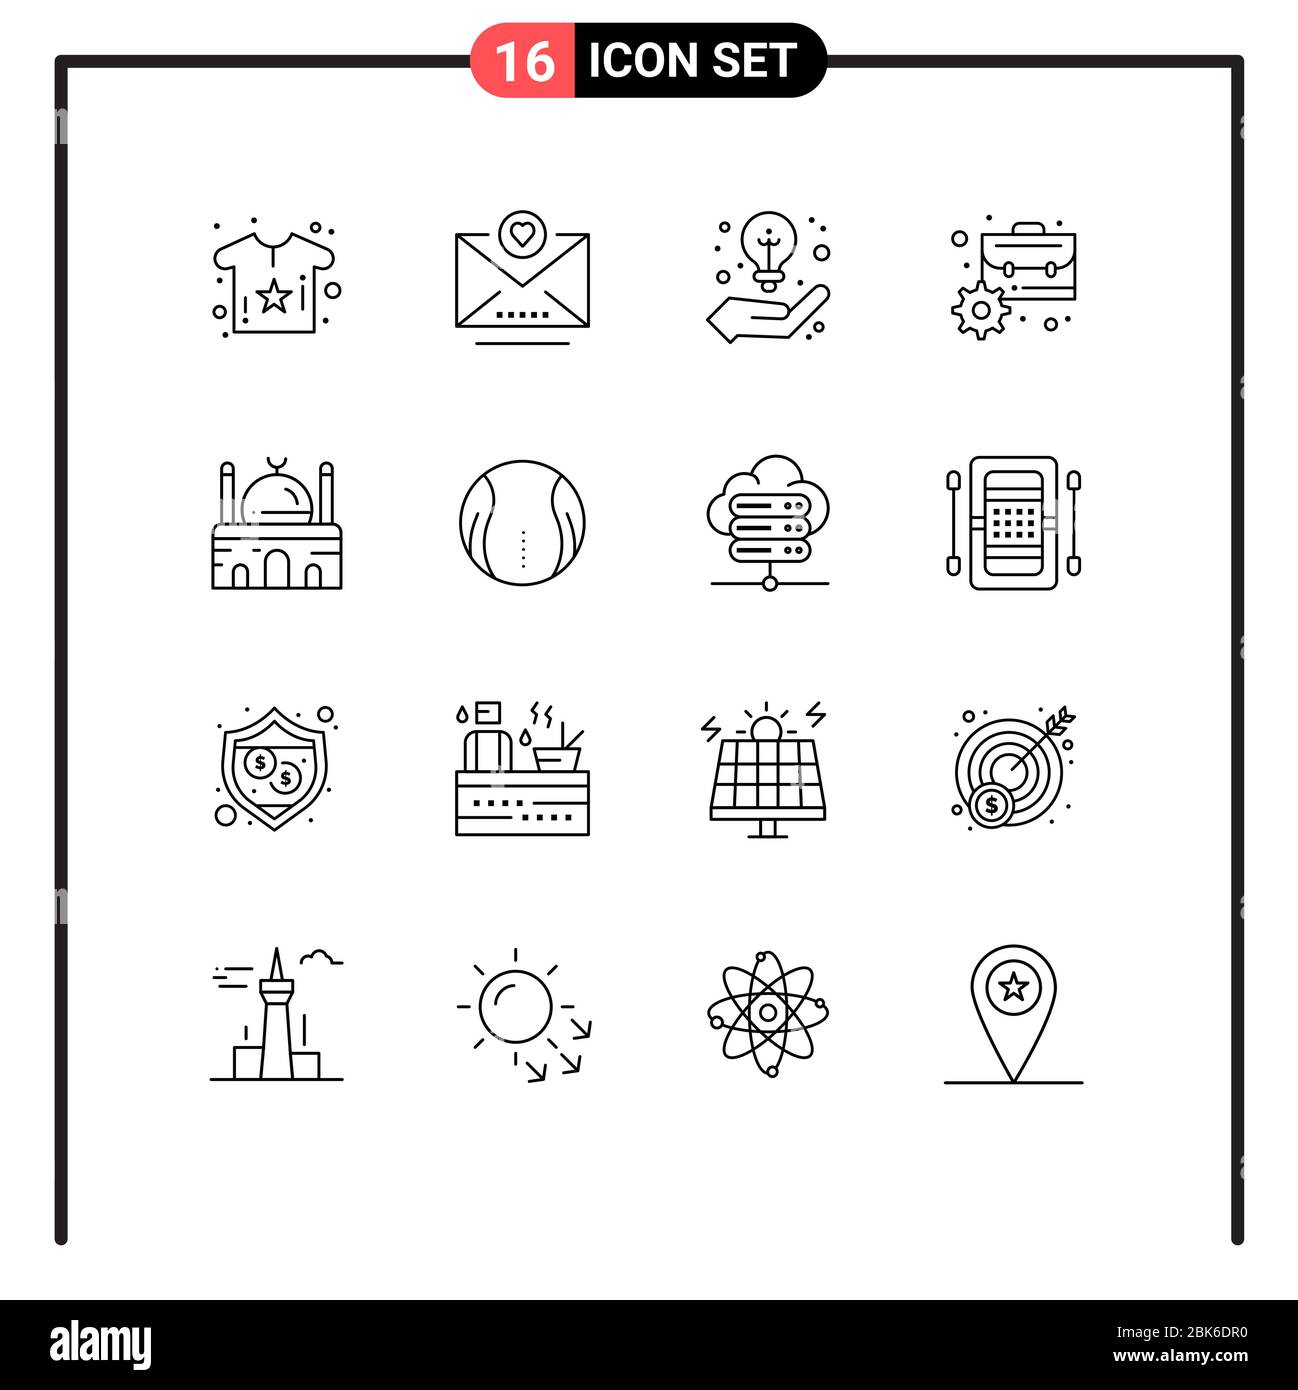 User Interface Pack of 16 Basic Outlines of mosque, building, idea, management, business Editable Vector Design Elements Stock Vector